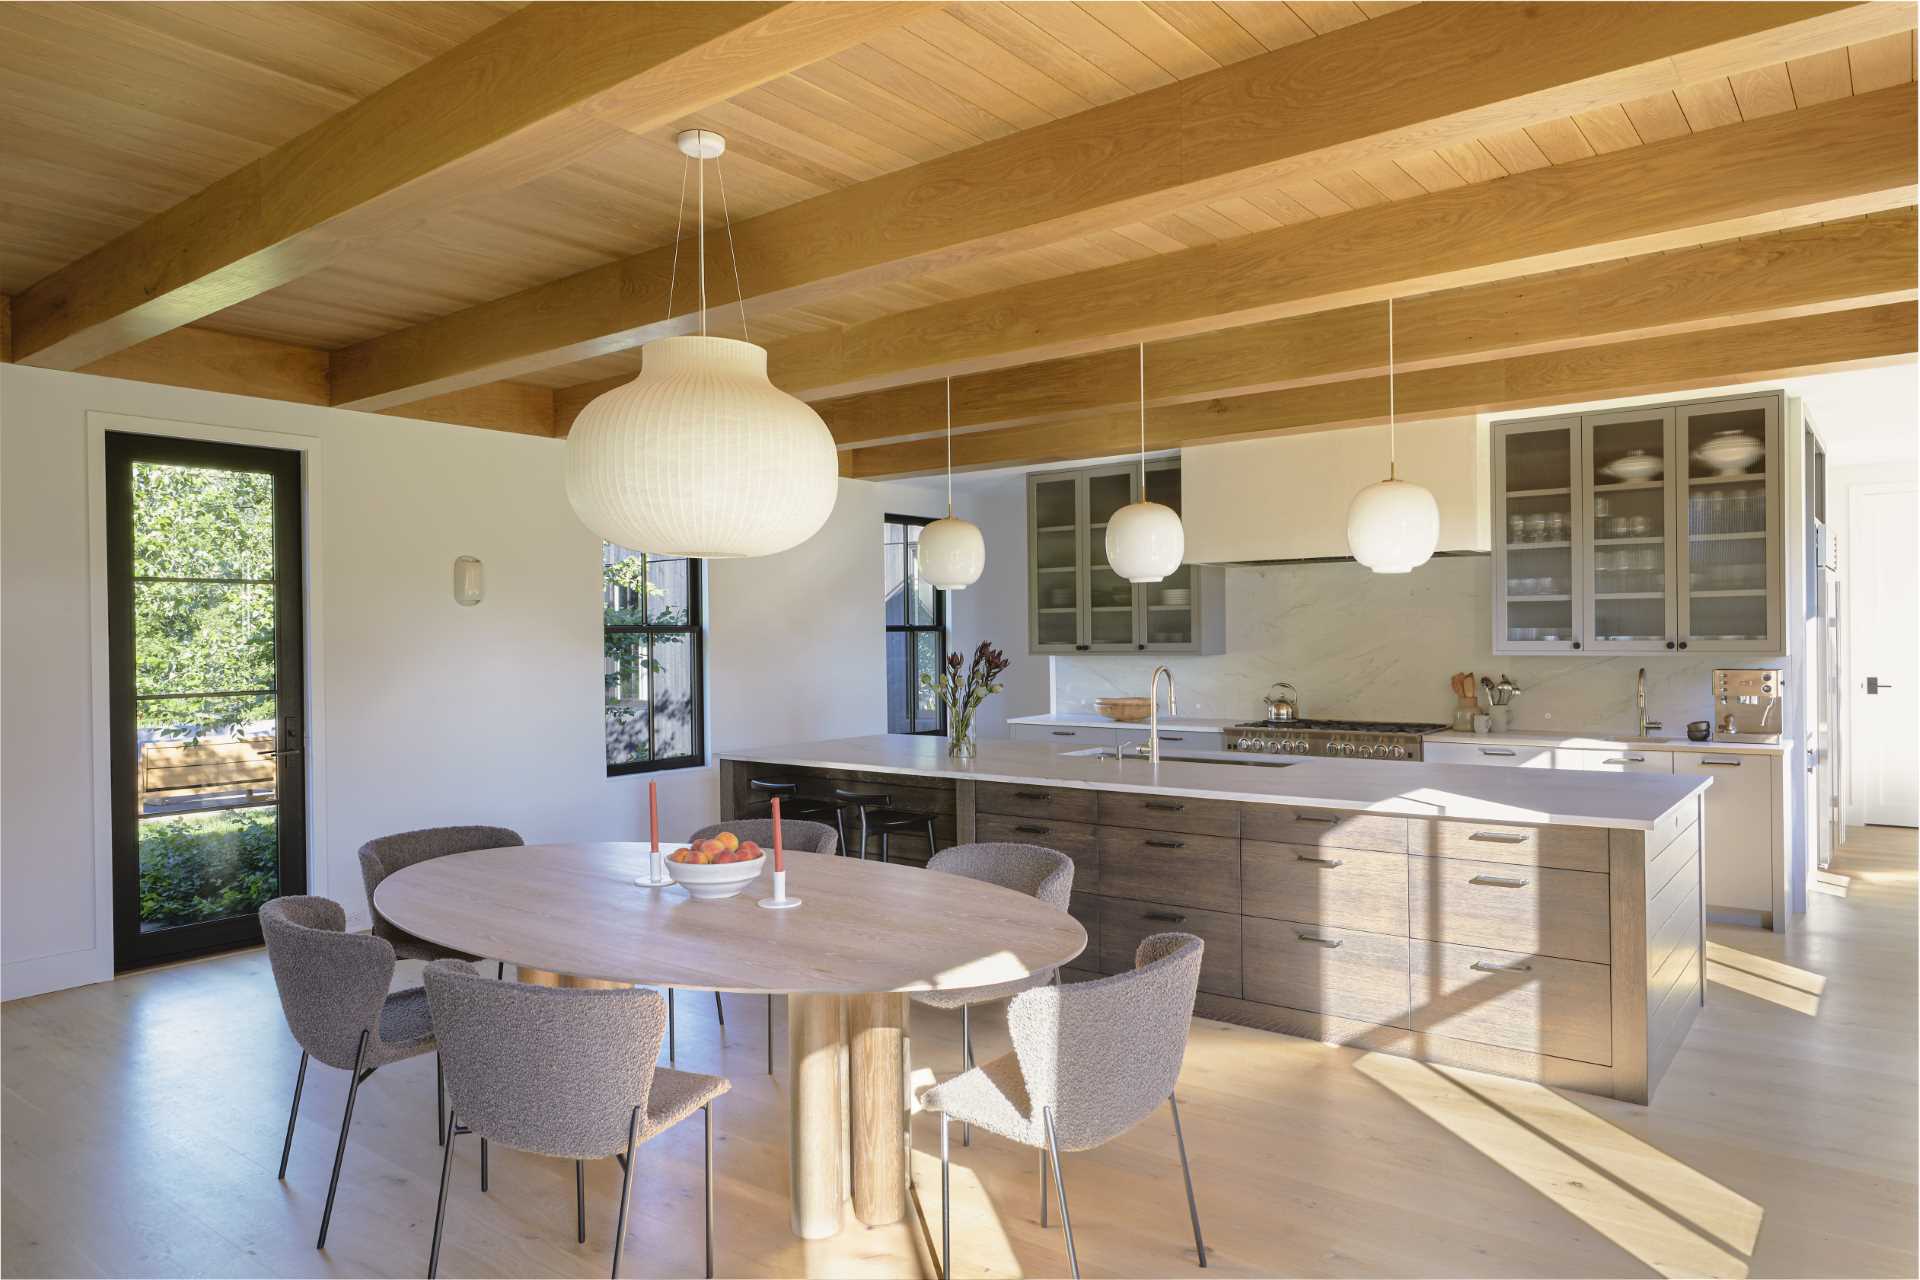 The dining area in this modern home separates the living room from the kitchen, while the kitchen includes a large island with additional seating.